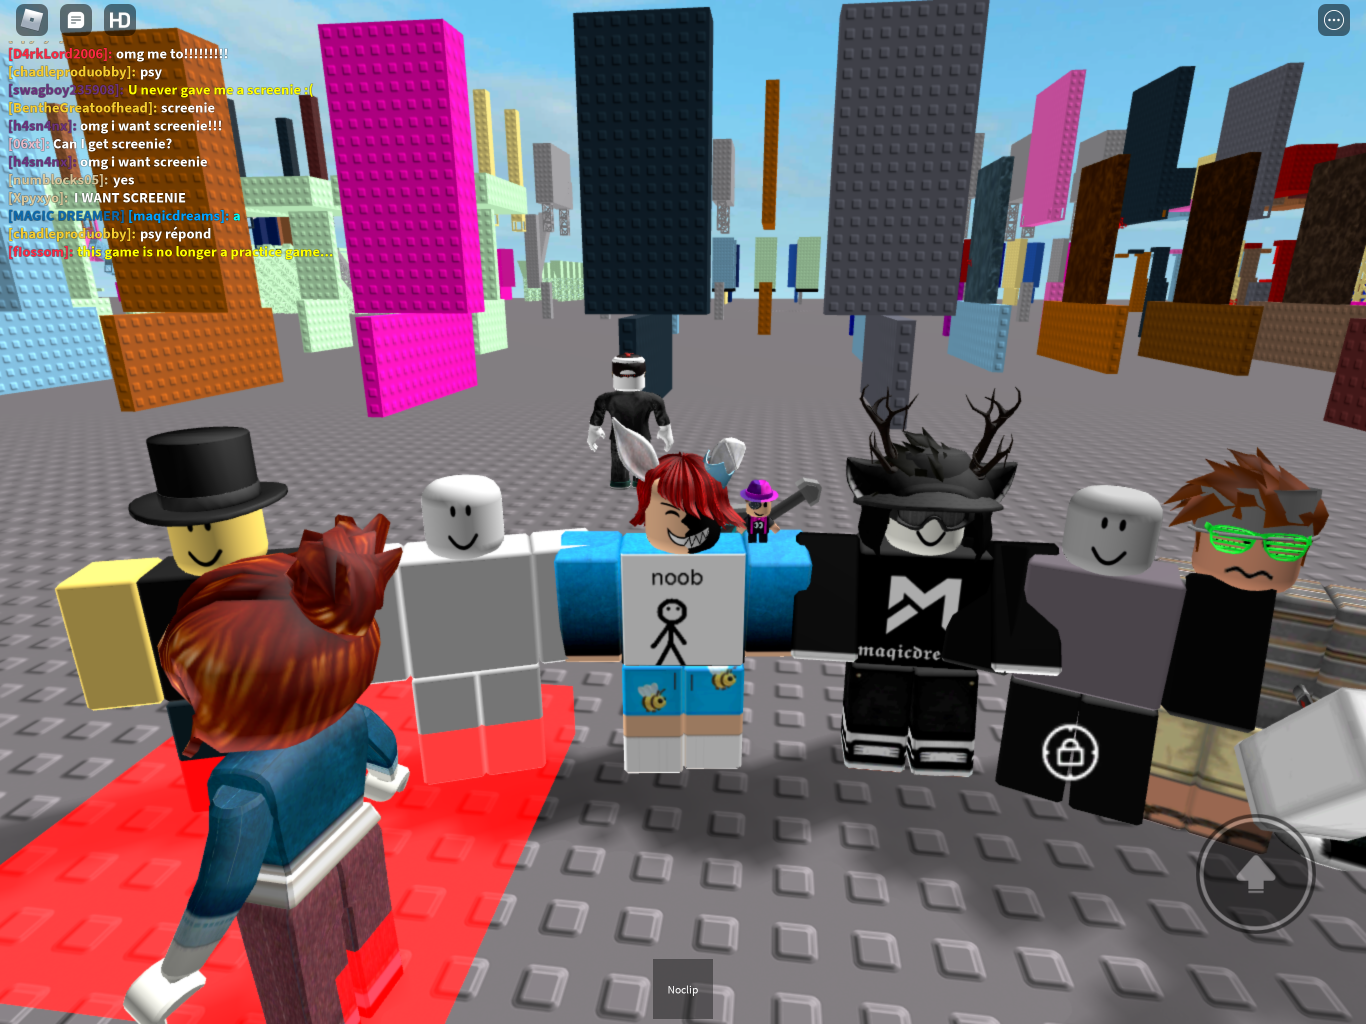 High Quality Crowded roblox game has YouTuber in it Blank Meme Template